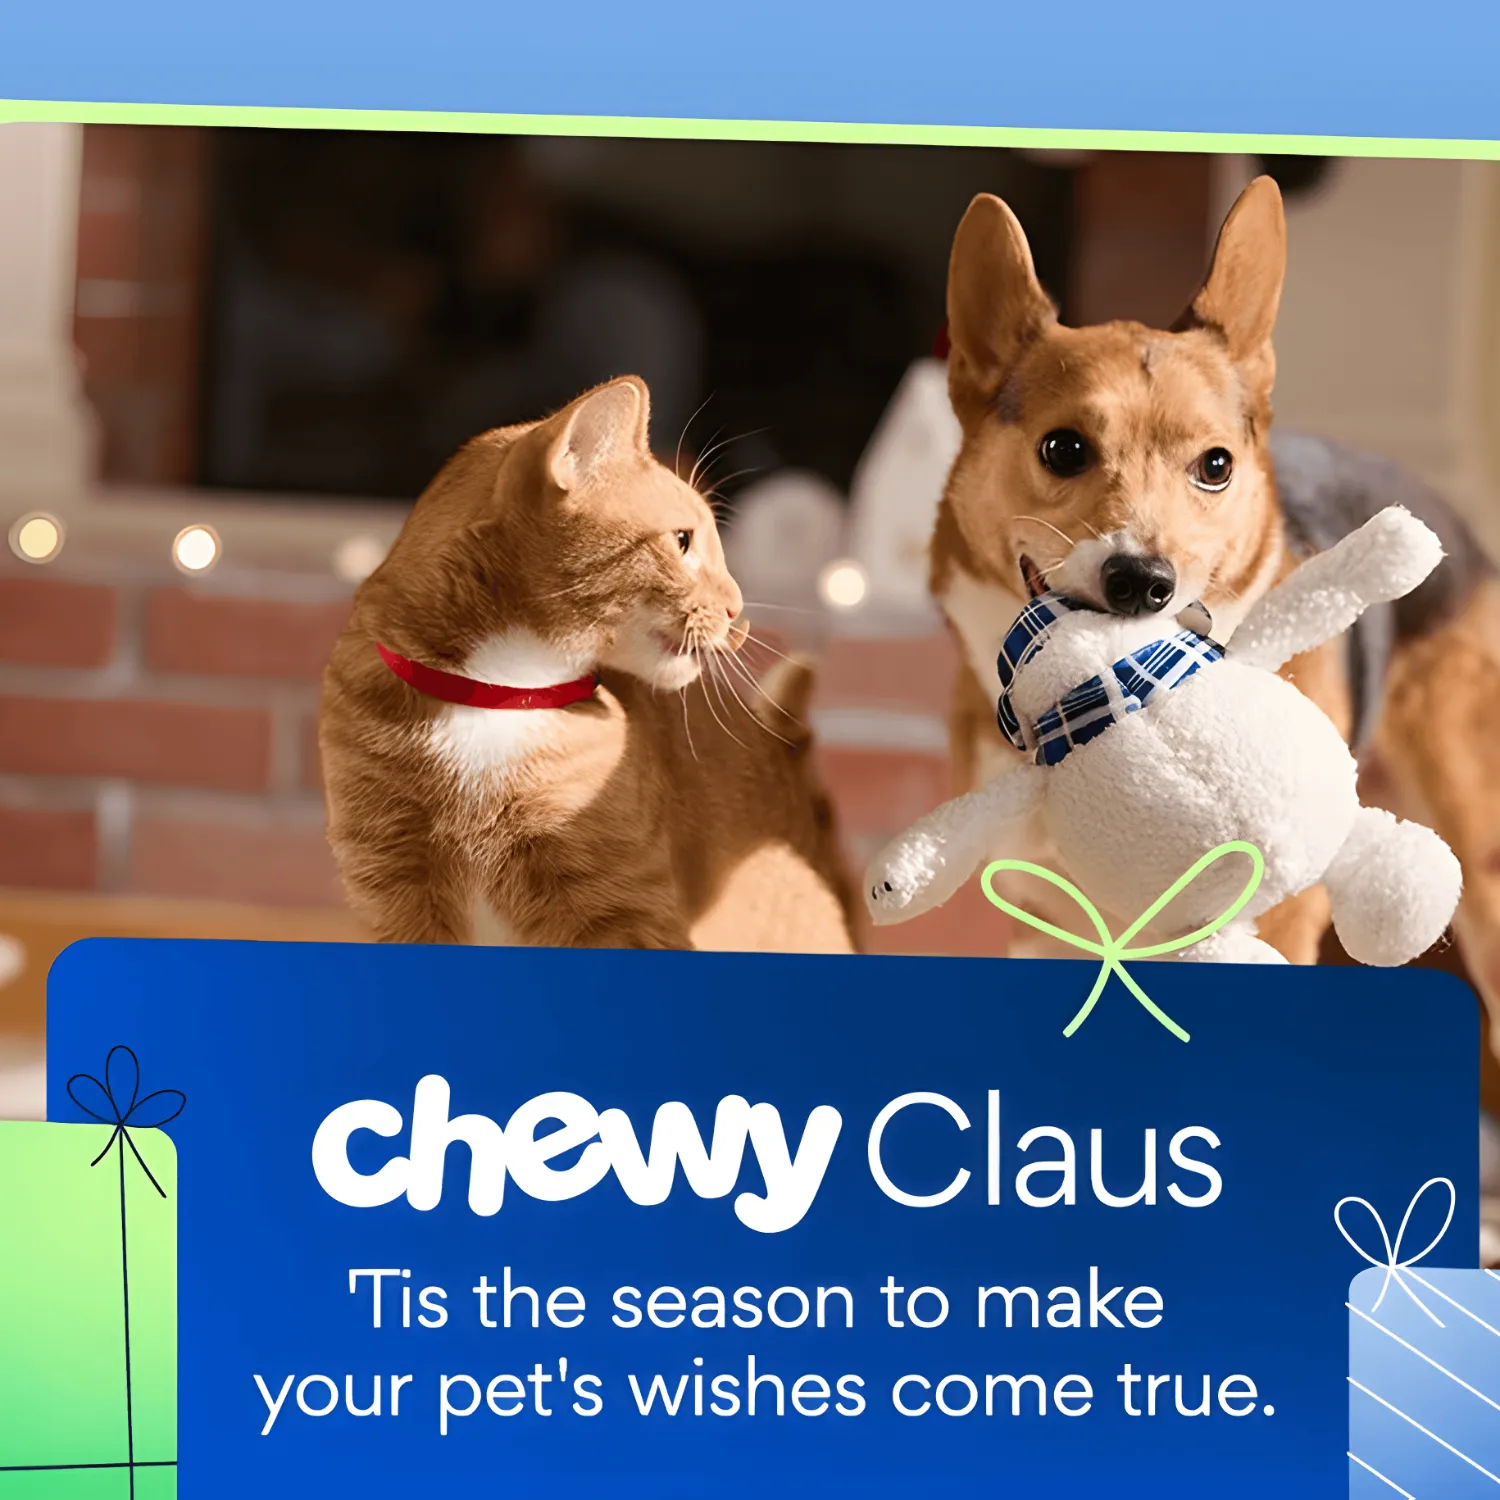 Free Prizes For Your Pet From Chewy Claus